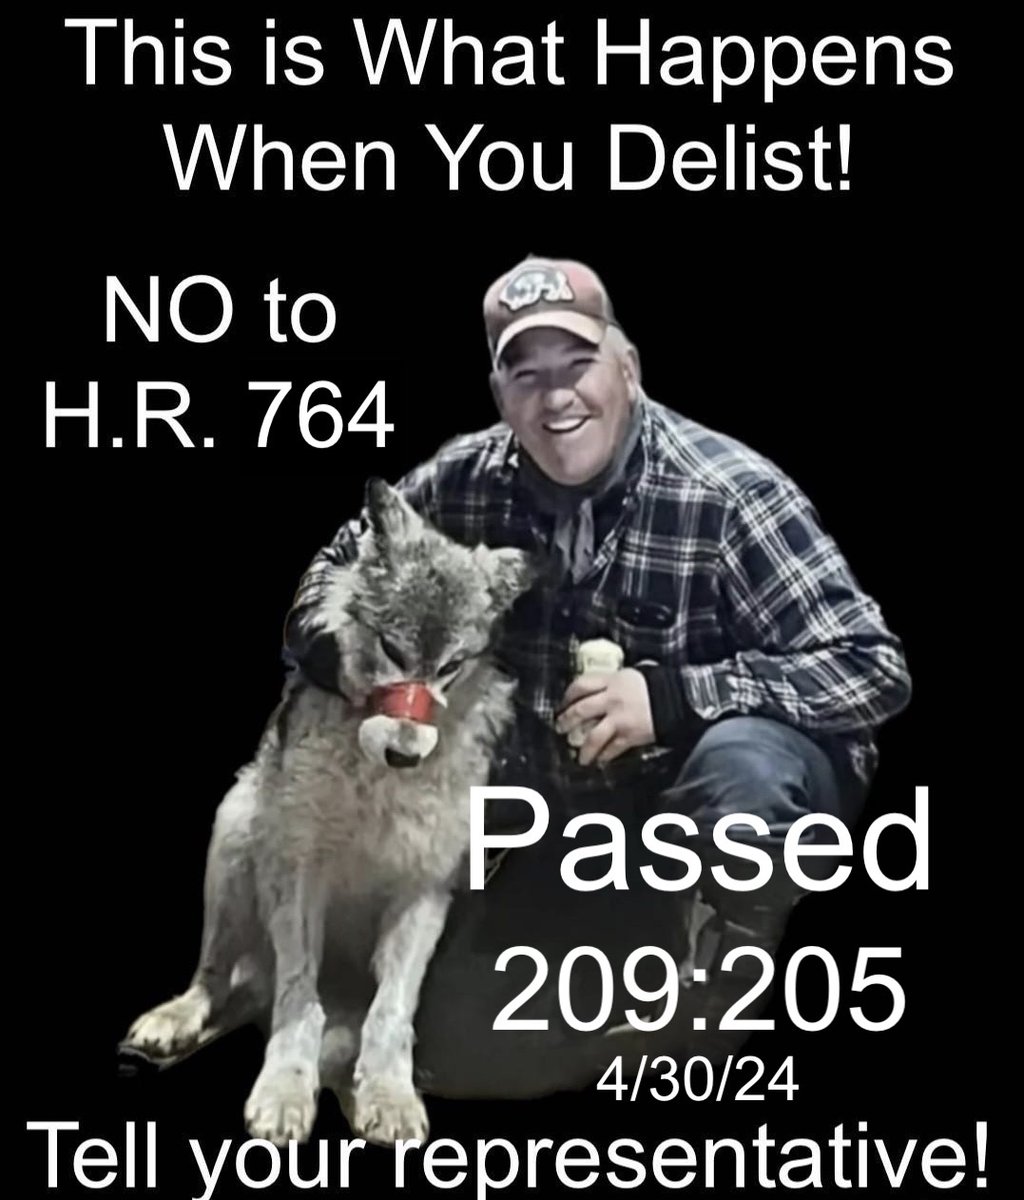 Disturbingly H.R. 764, Rep. Boebert's 'Trust the Science' misleading bill passed 209:205 in the House.This bill would delist the gray wolf nationally and bars any judicial review. Here's how your representative voted. Remember them. clerk.house.gov/Votes/2024169. Vote accordingly.